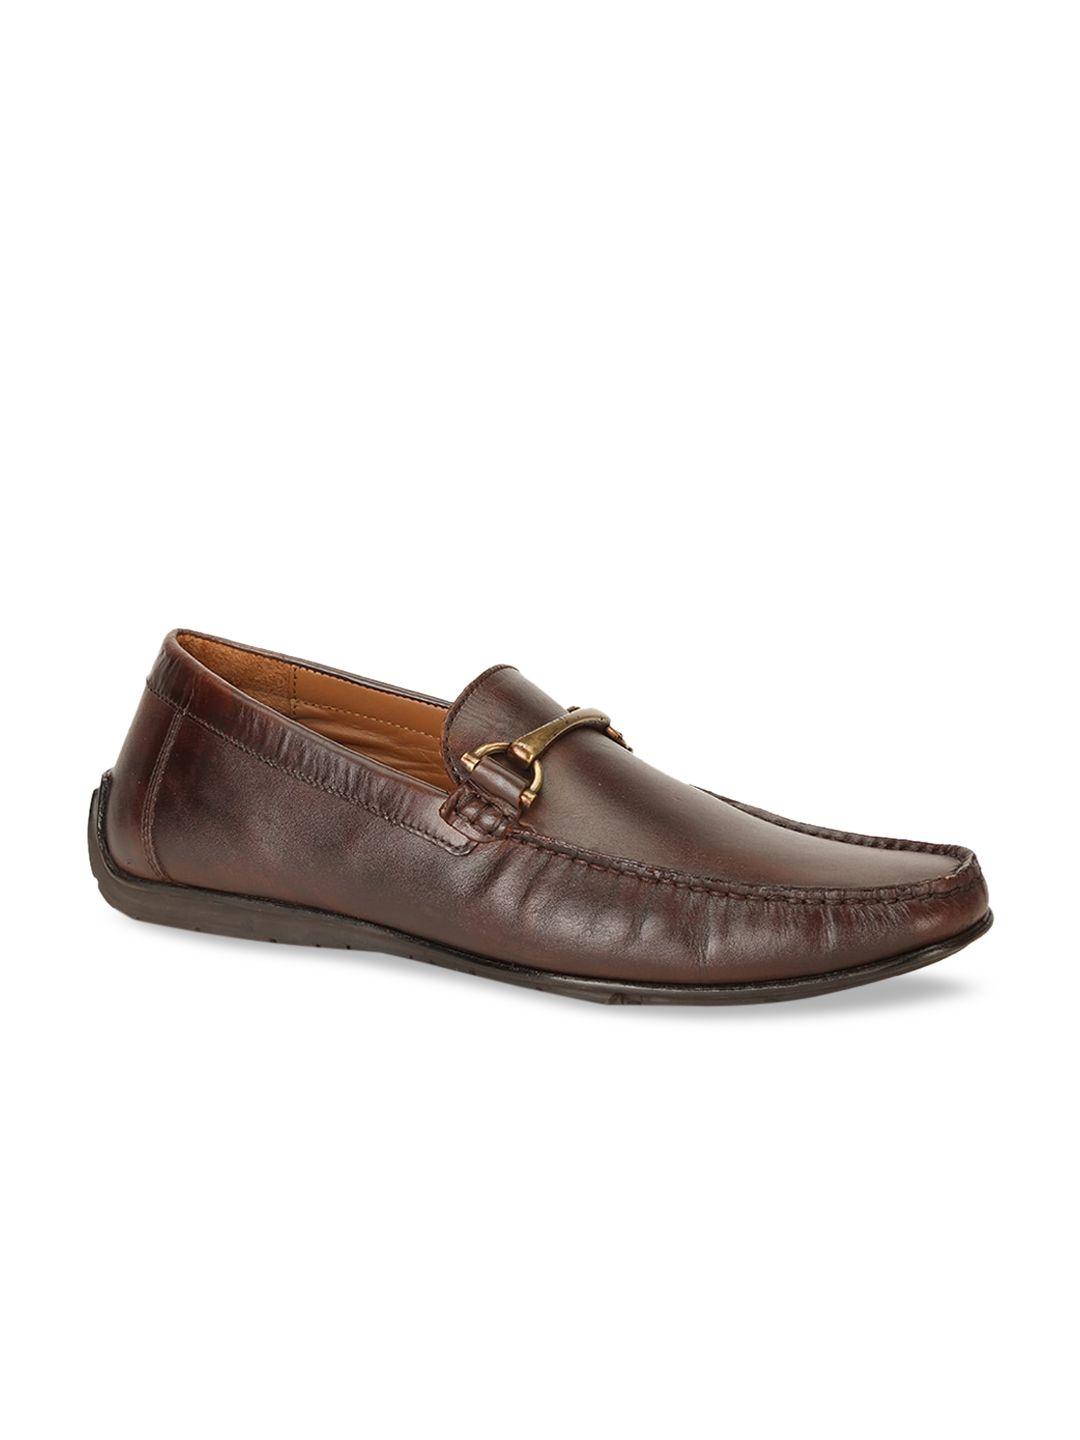 hush puppies men brown leather loafers